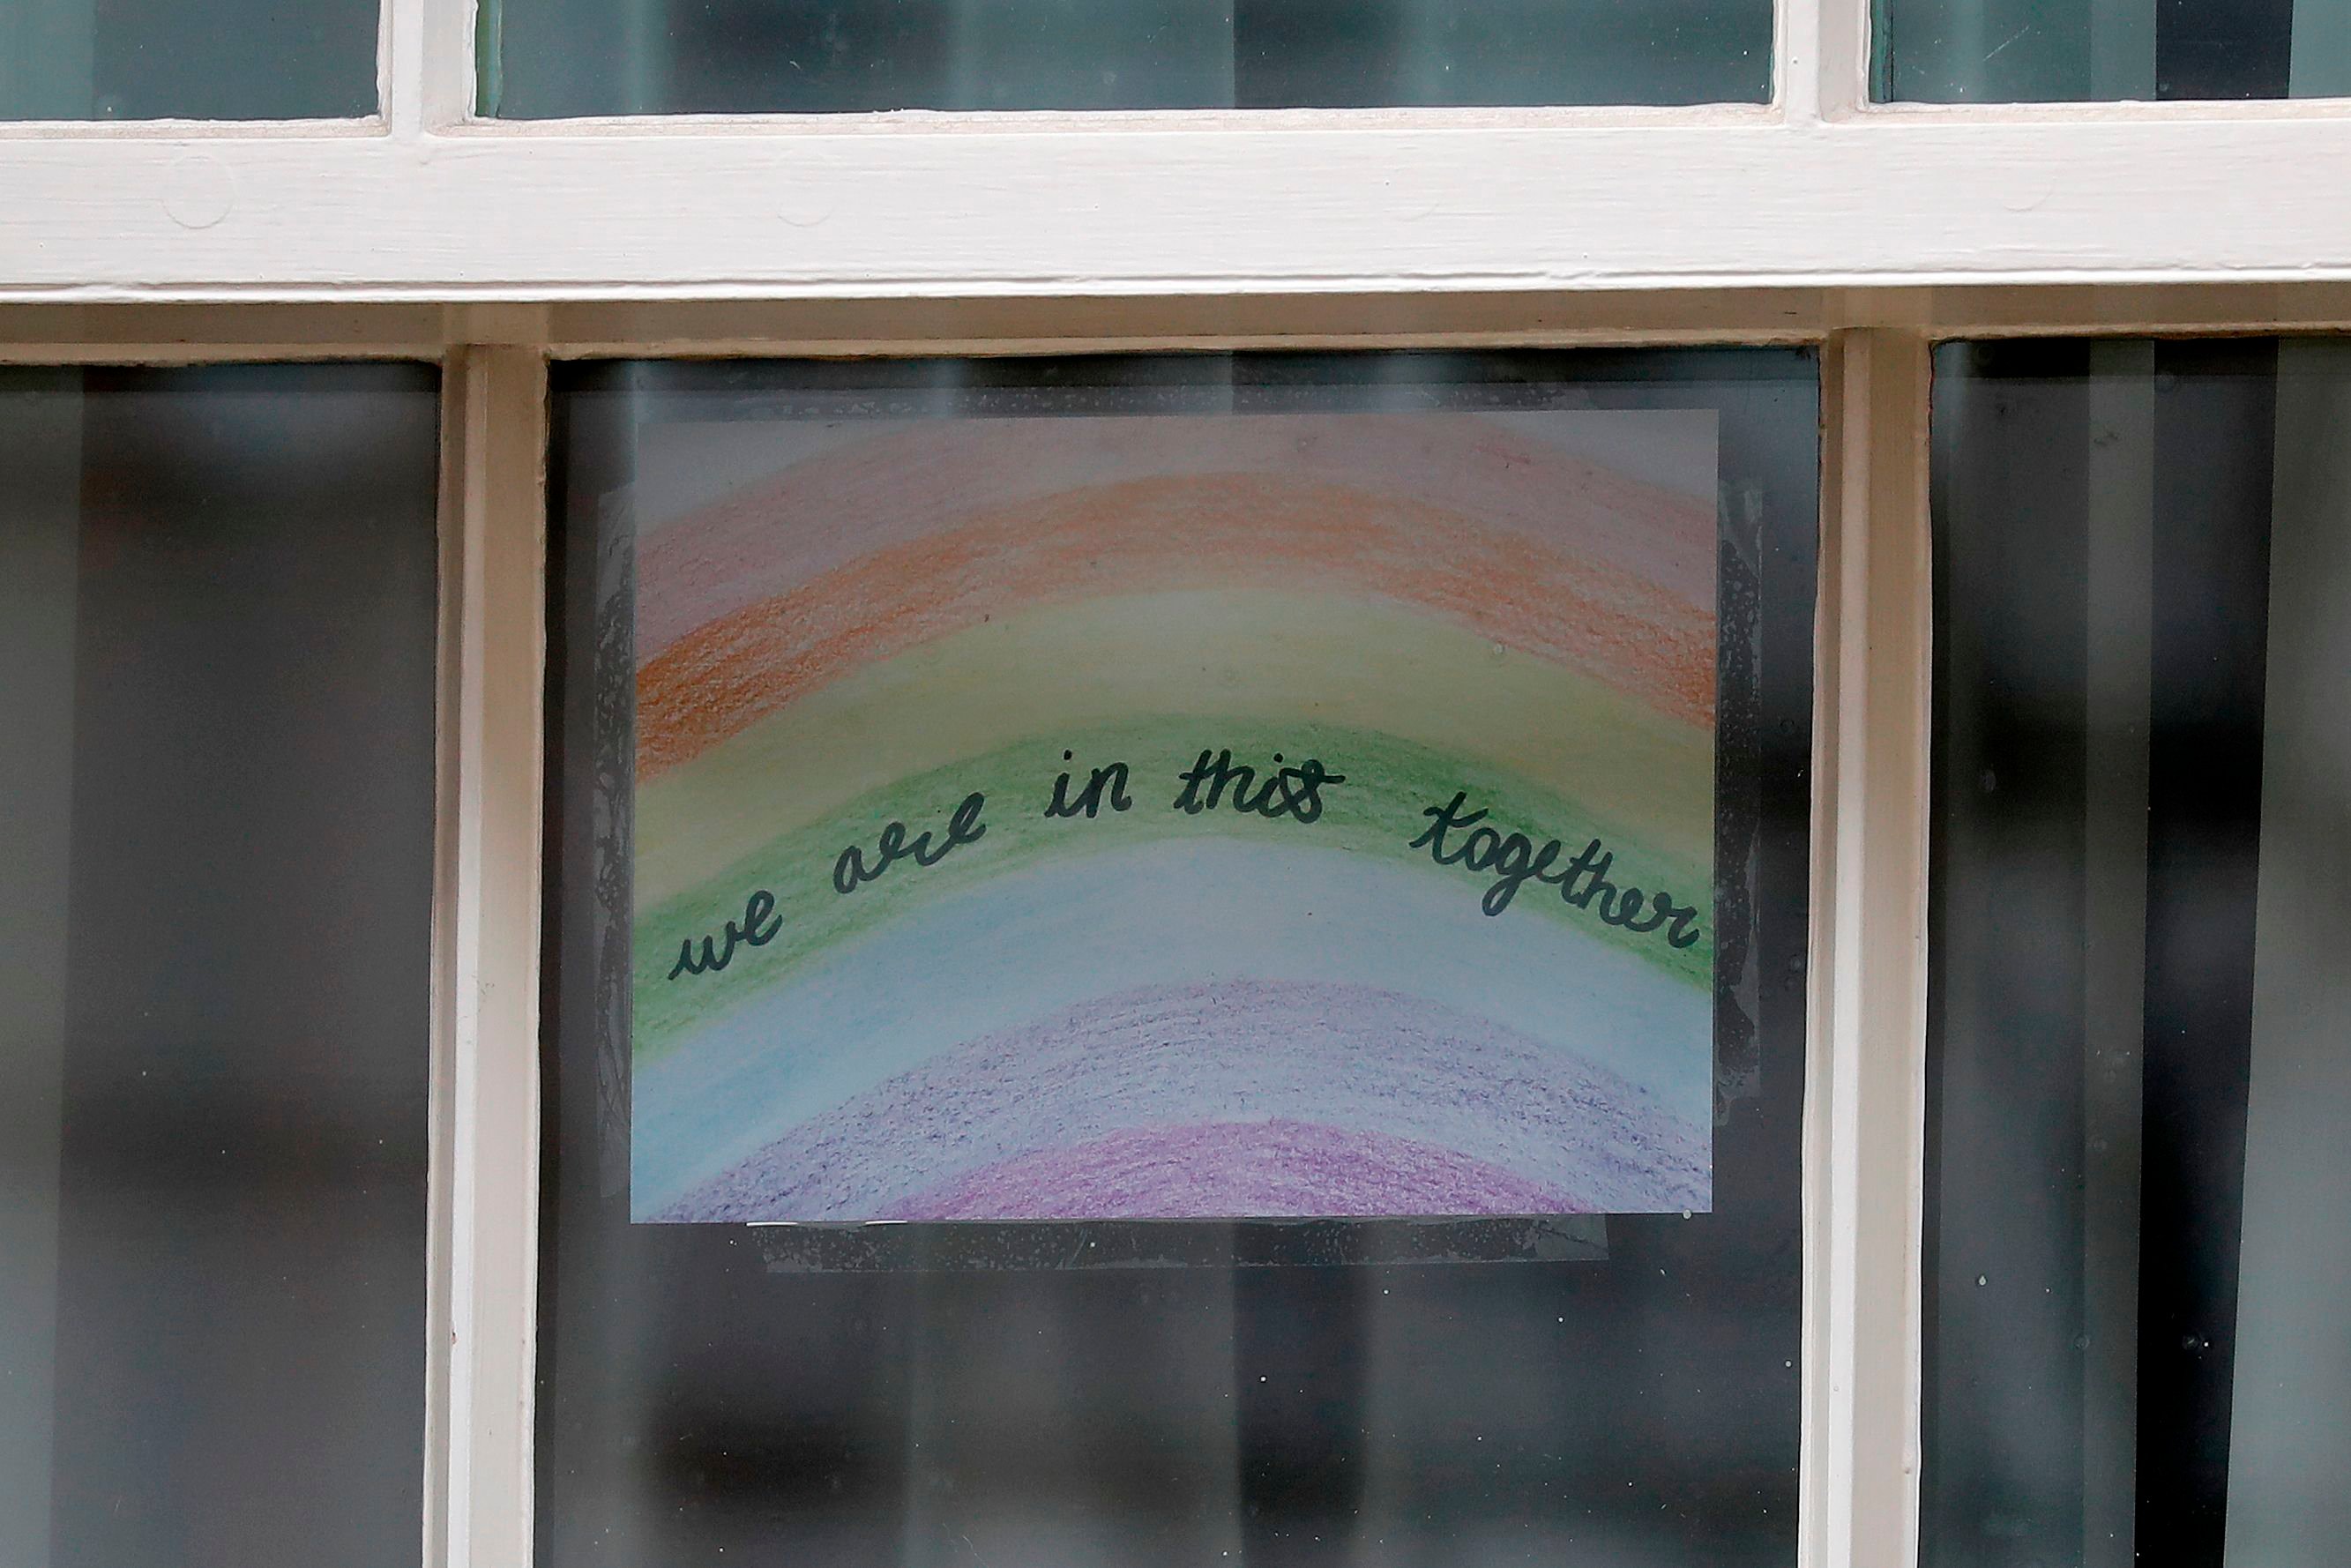 A poster of a rainbow, being used as a symbol of hope during the COVID-19 pandemic, with the words "we are in this together" is pictured in a window at 10 Downing Street, the official residence of Britain